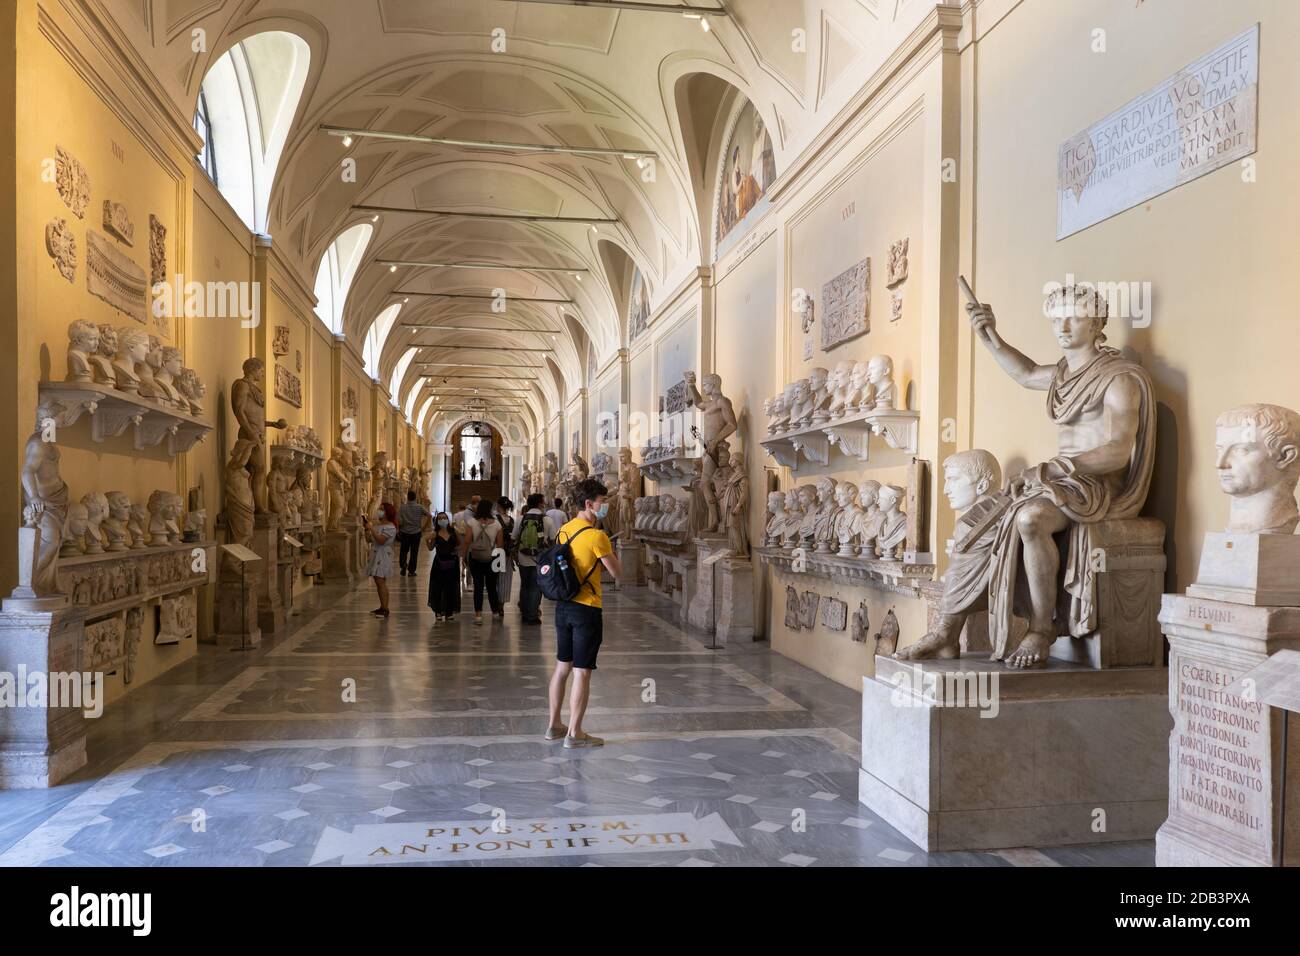 The Chiaramonti Museum interior in Vaticans Museums, Rome, Italy Stock Photo